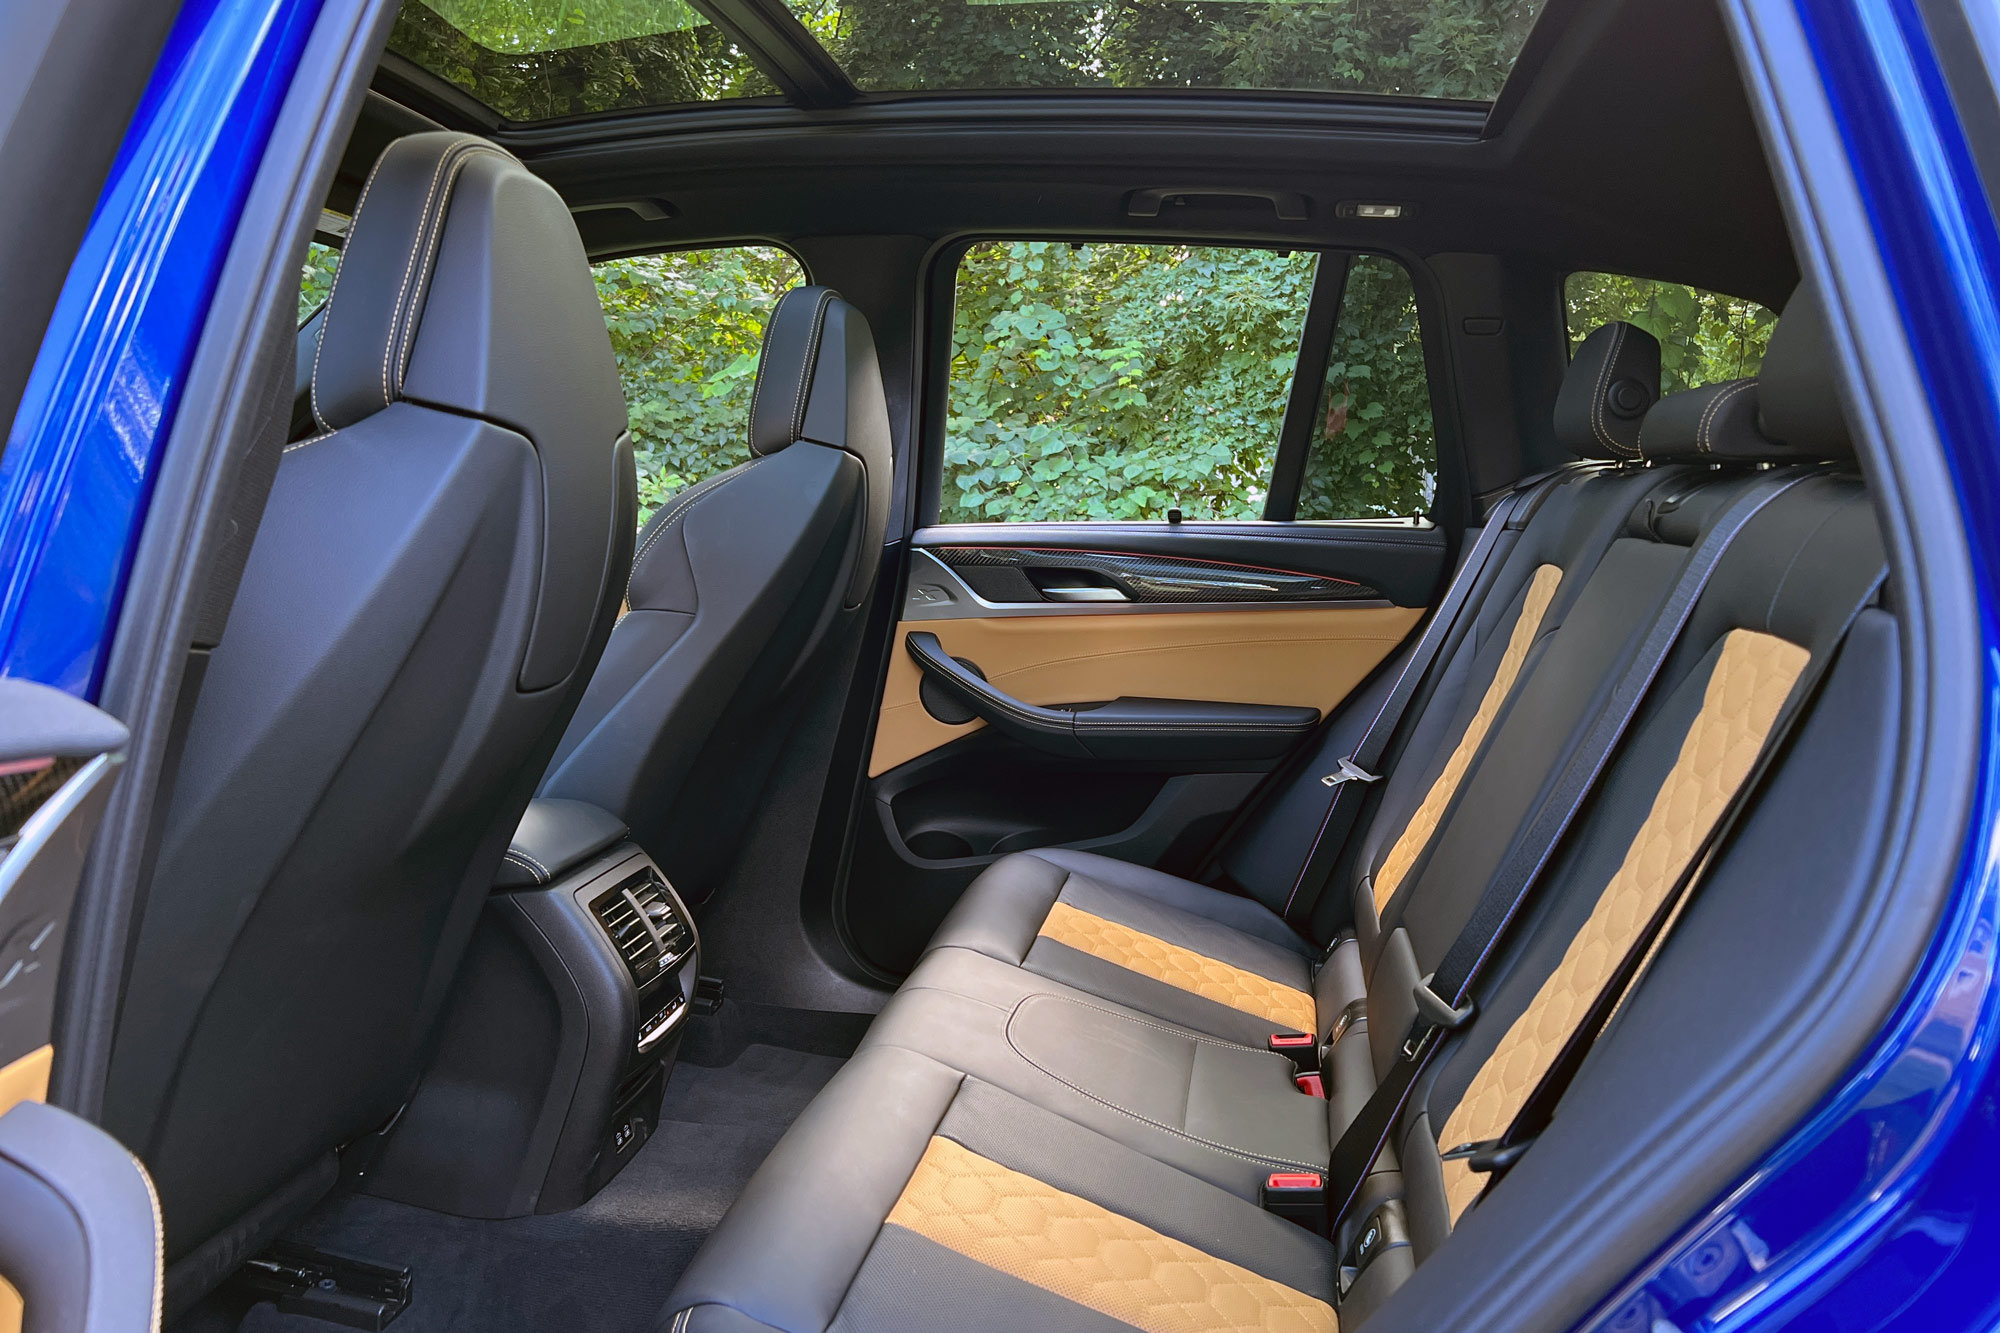 2023 BMW X3 M in Le Mans Blue backseats in brown and black with view of forest